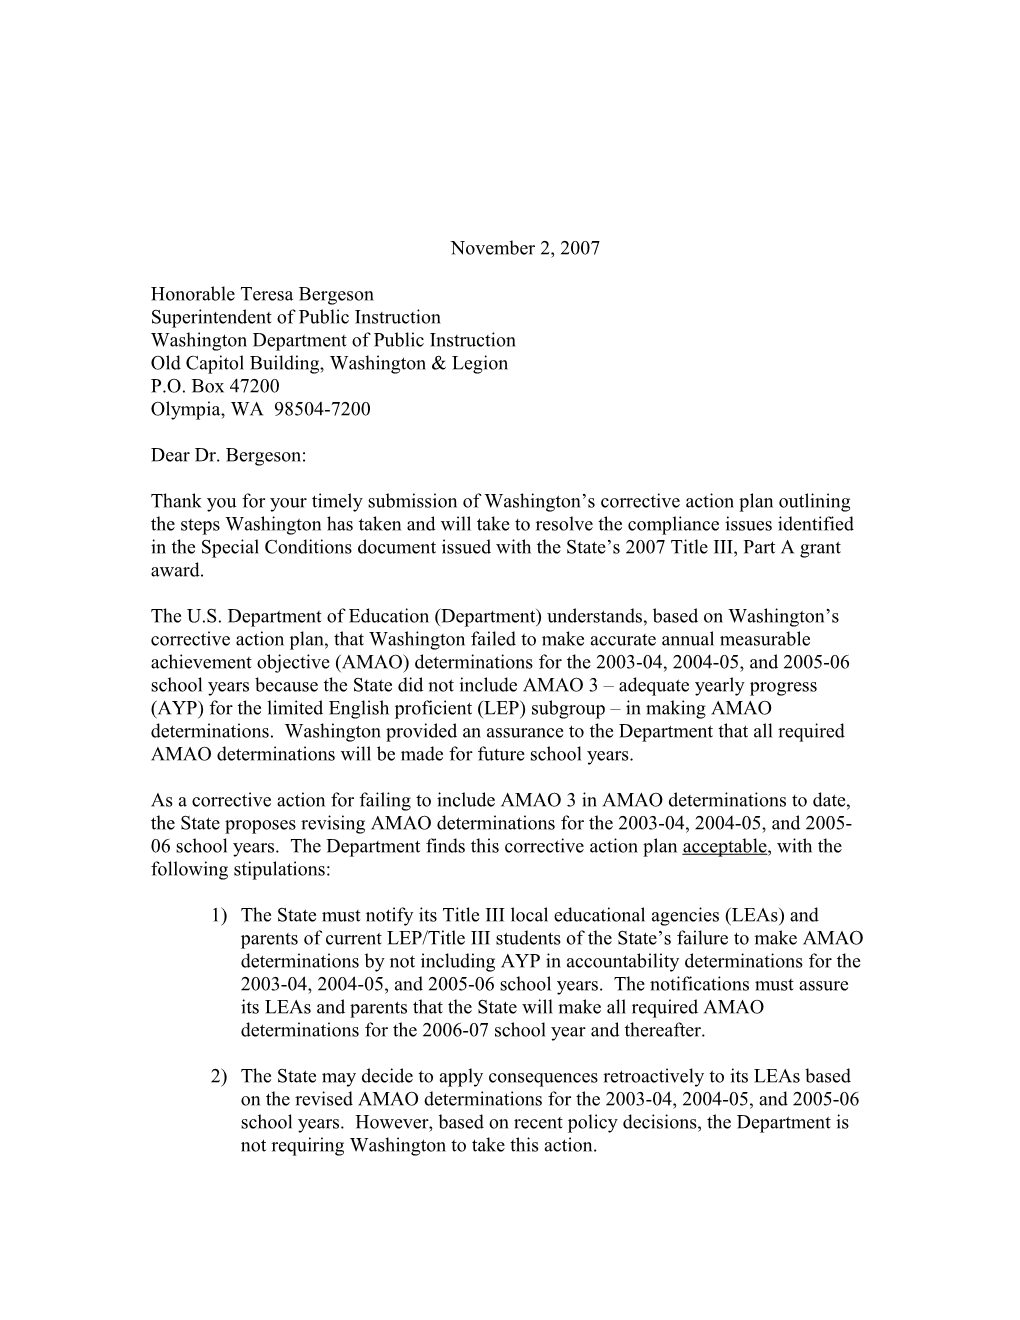 Letter Regarding the Title III, Part a Grant Award Made to Washington MS Word